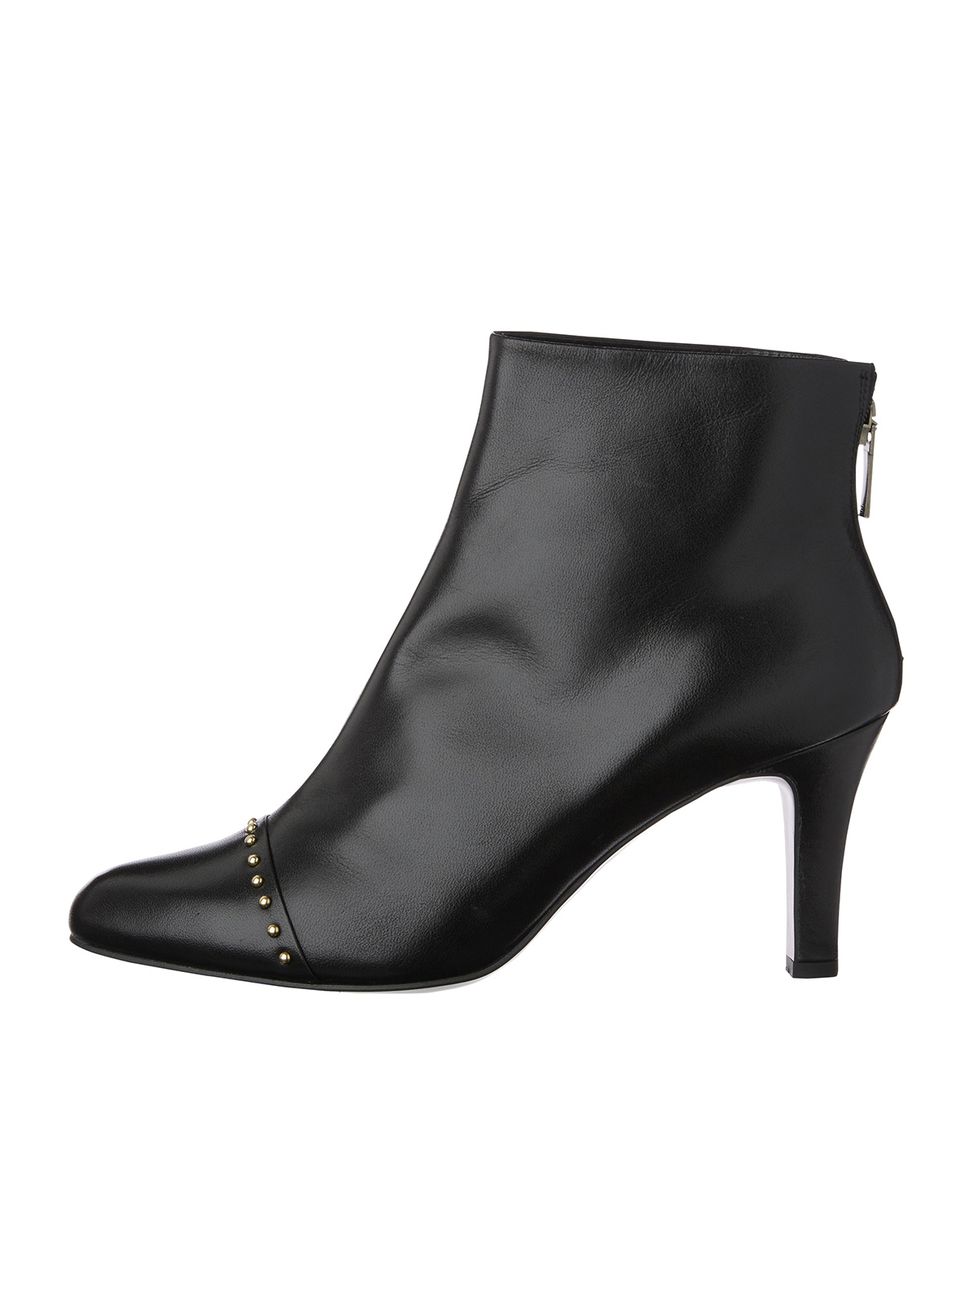 Footwear, Boot, Leather, Fashion, Black, Beige, High heels, Fashion design, Synthetic rubber, 